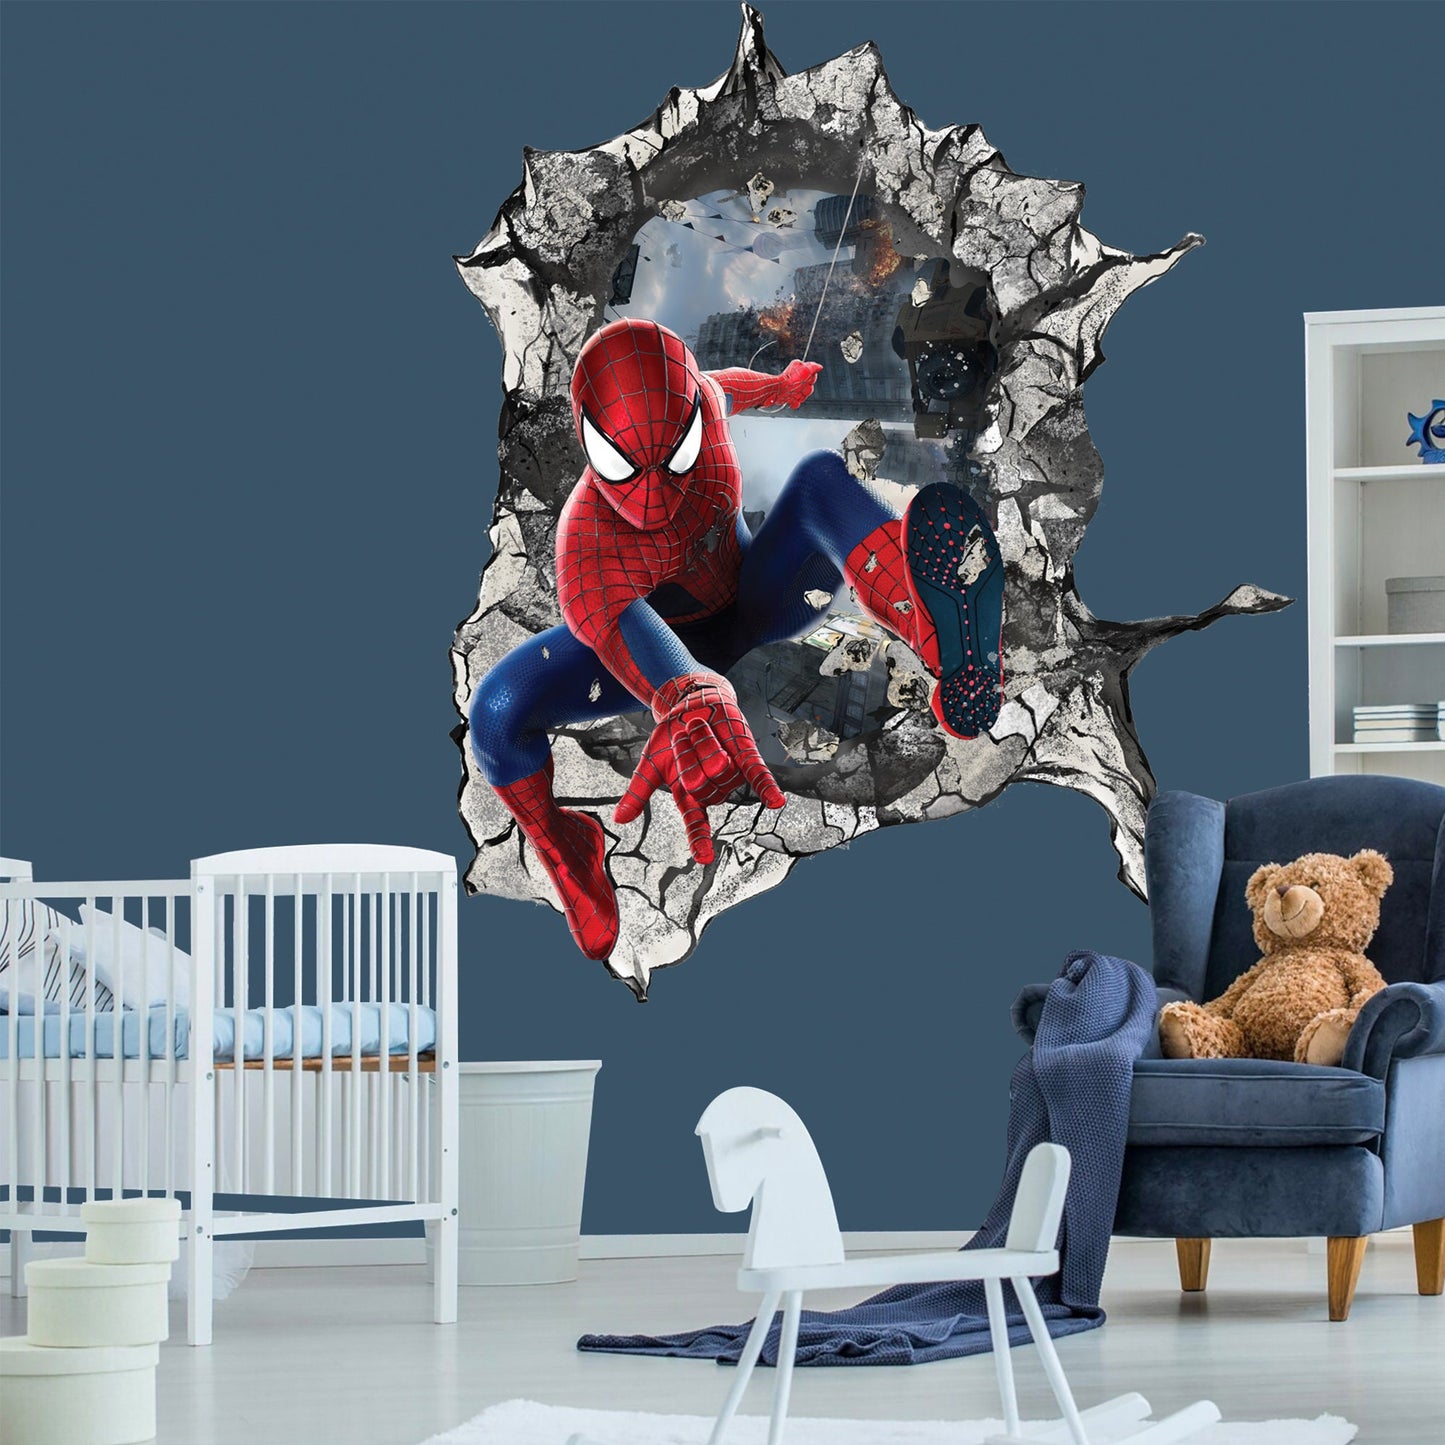 Avengers Superhero Wall Decal - Dynamic Room Decor - Spider-Man Jumping Out Edition - SP007